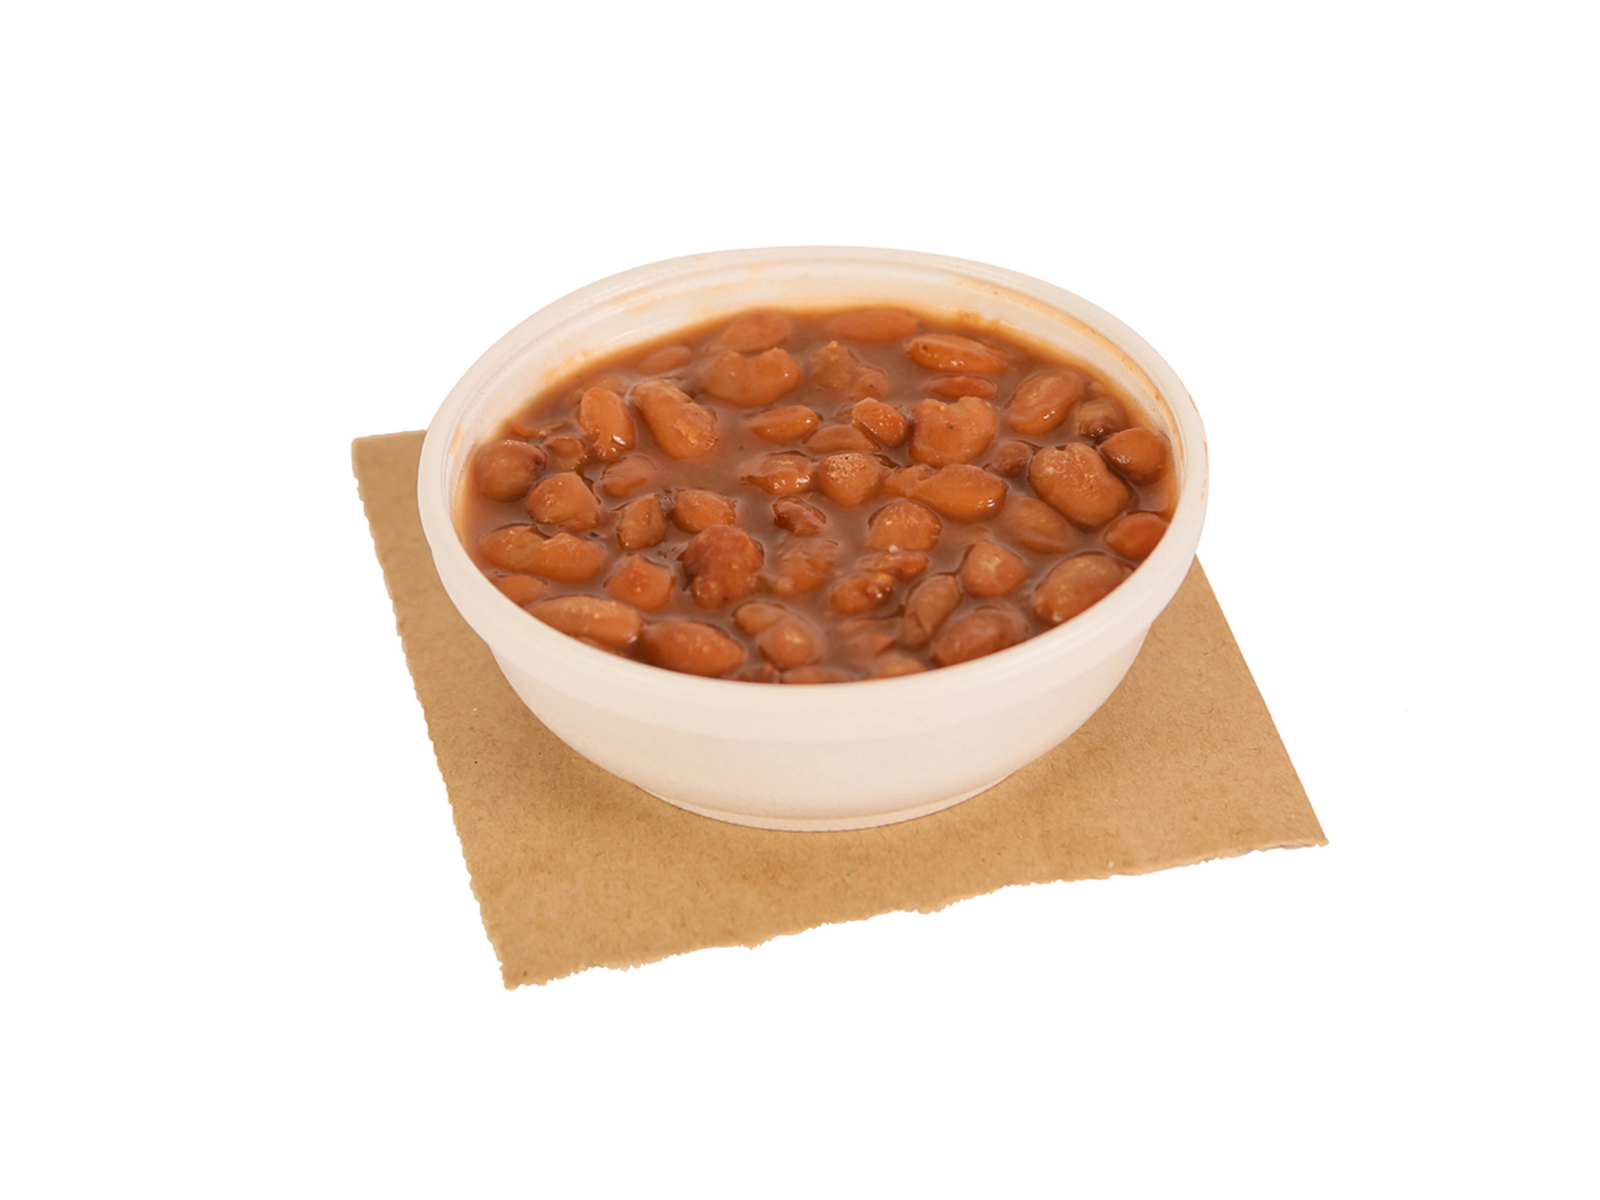 Portion of pinto beans